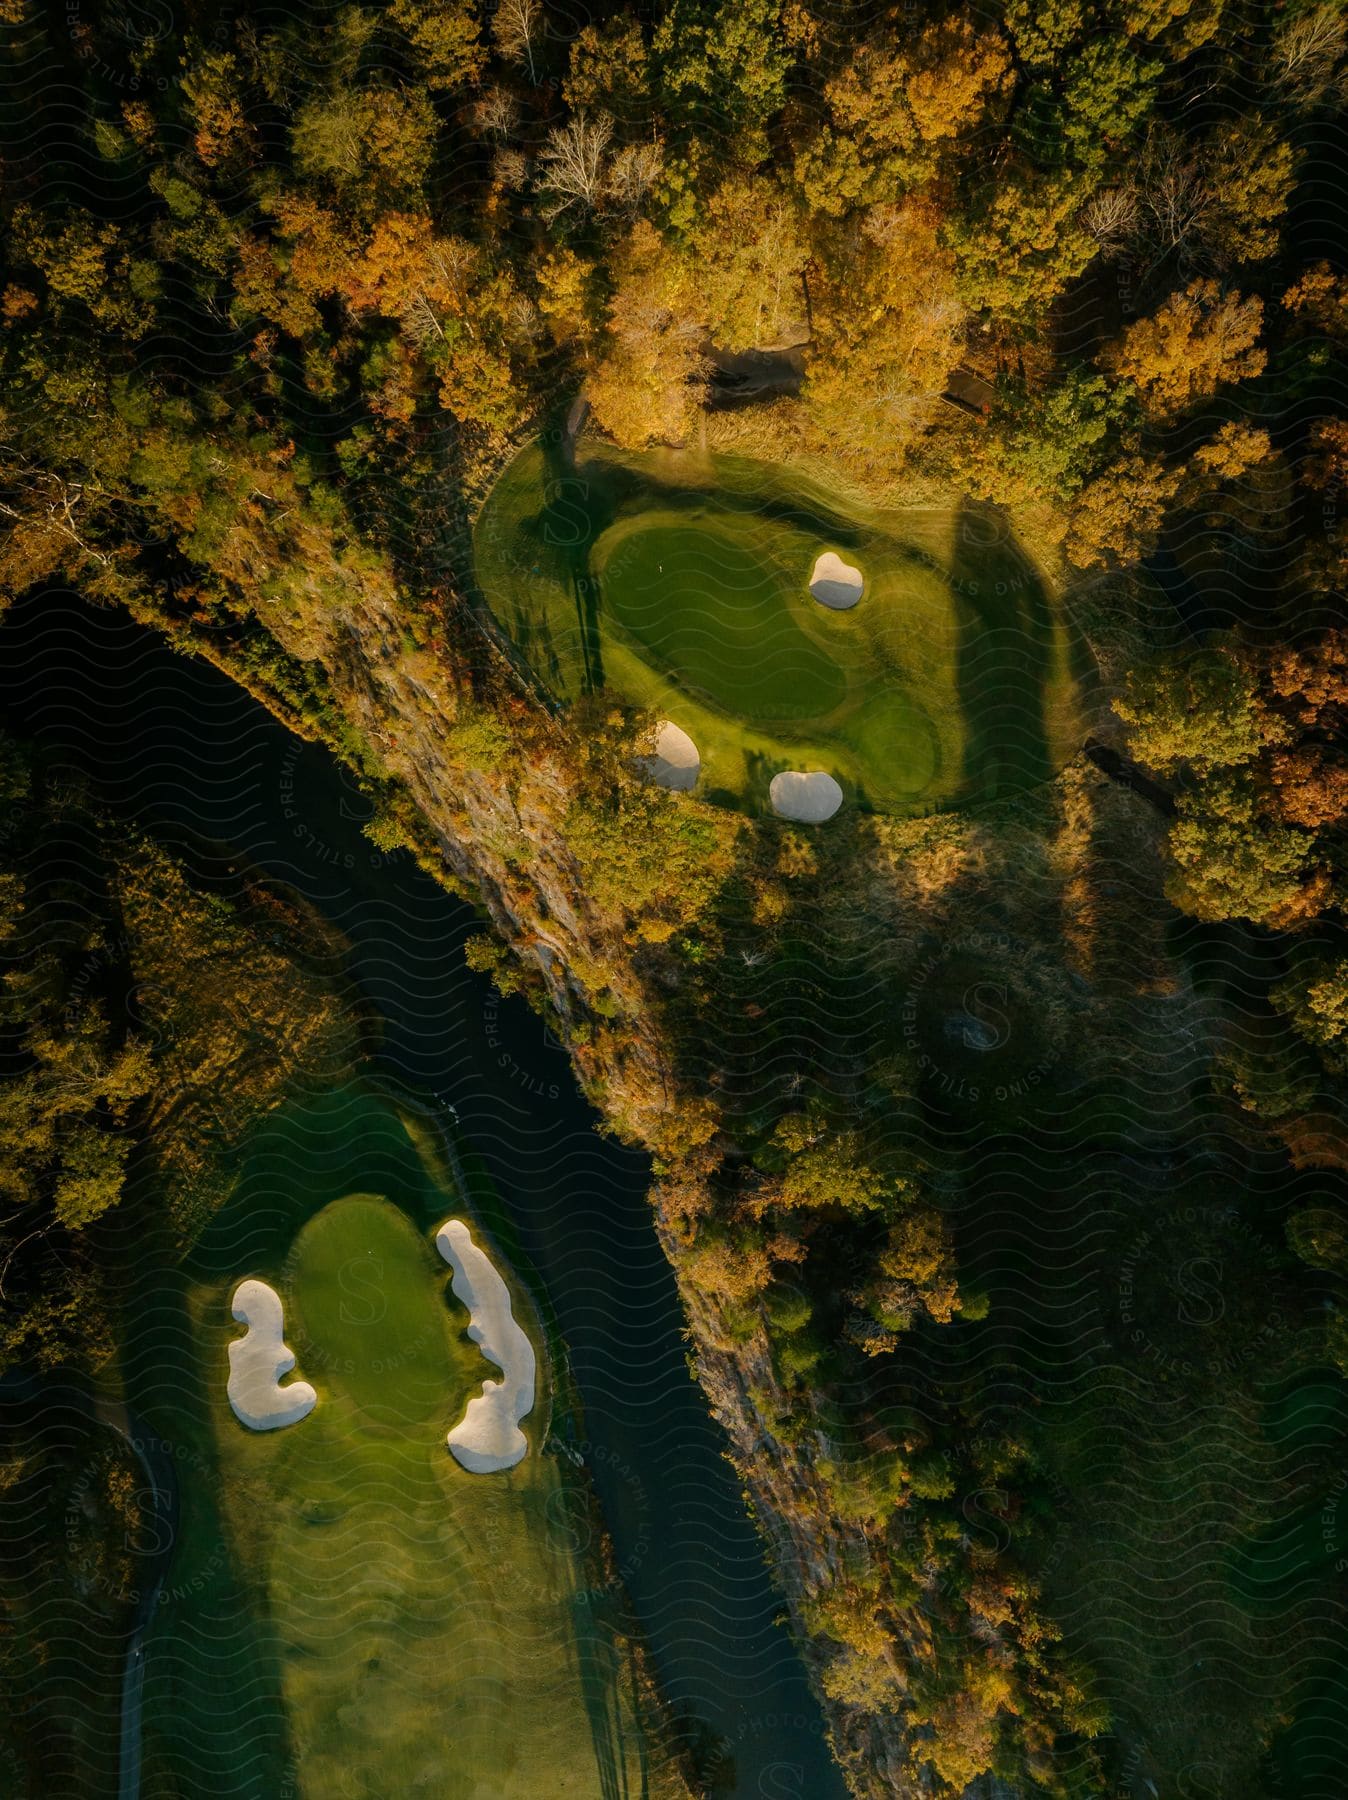 Aerial view of a river running between golf courses with trees in fall colors